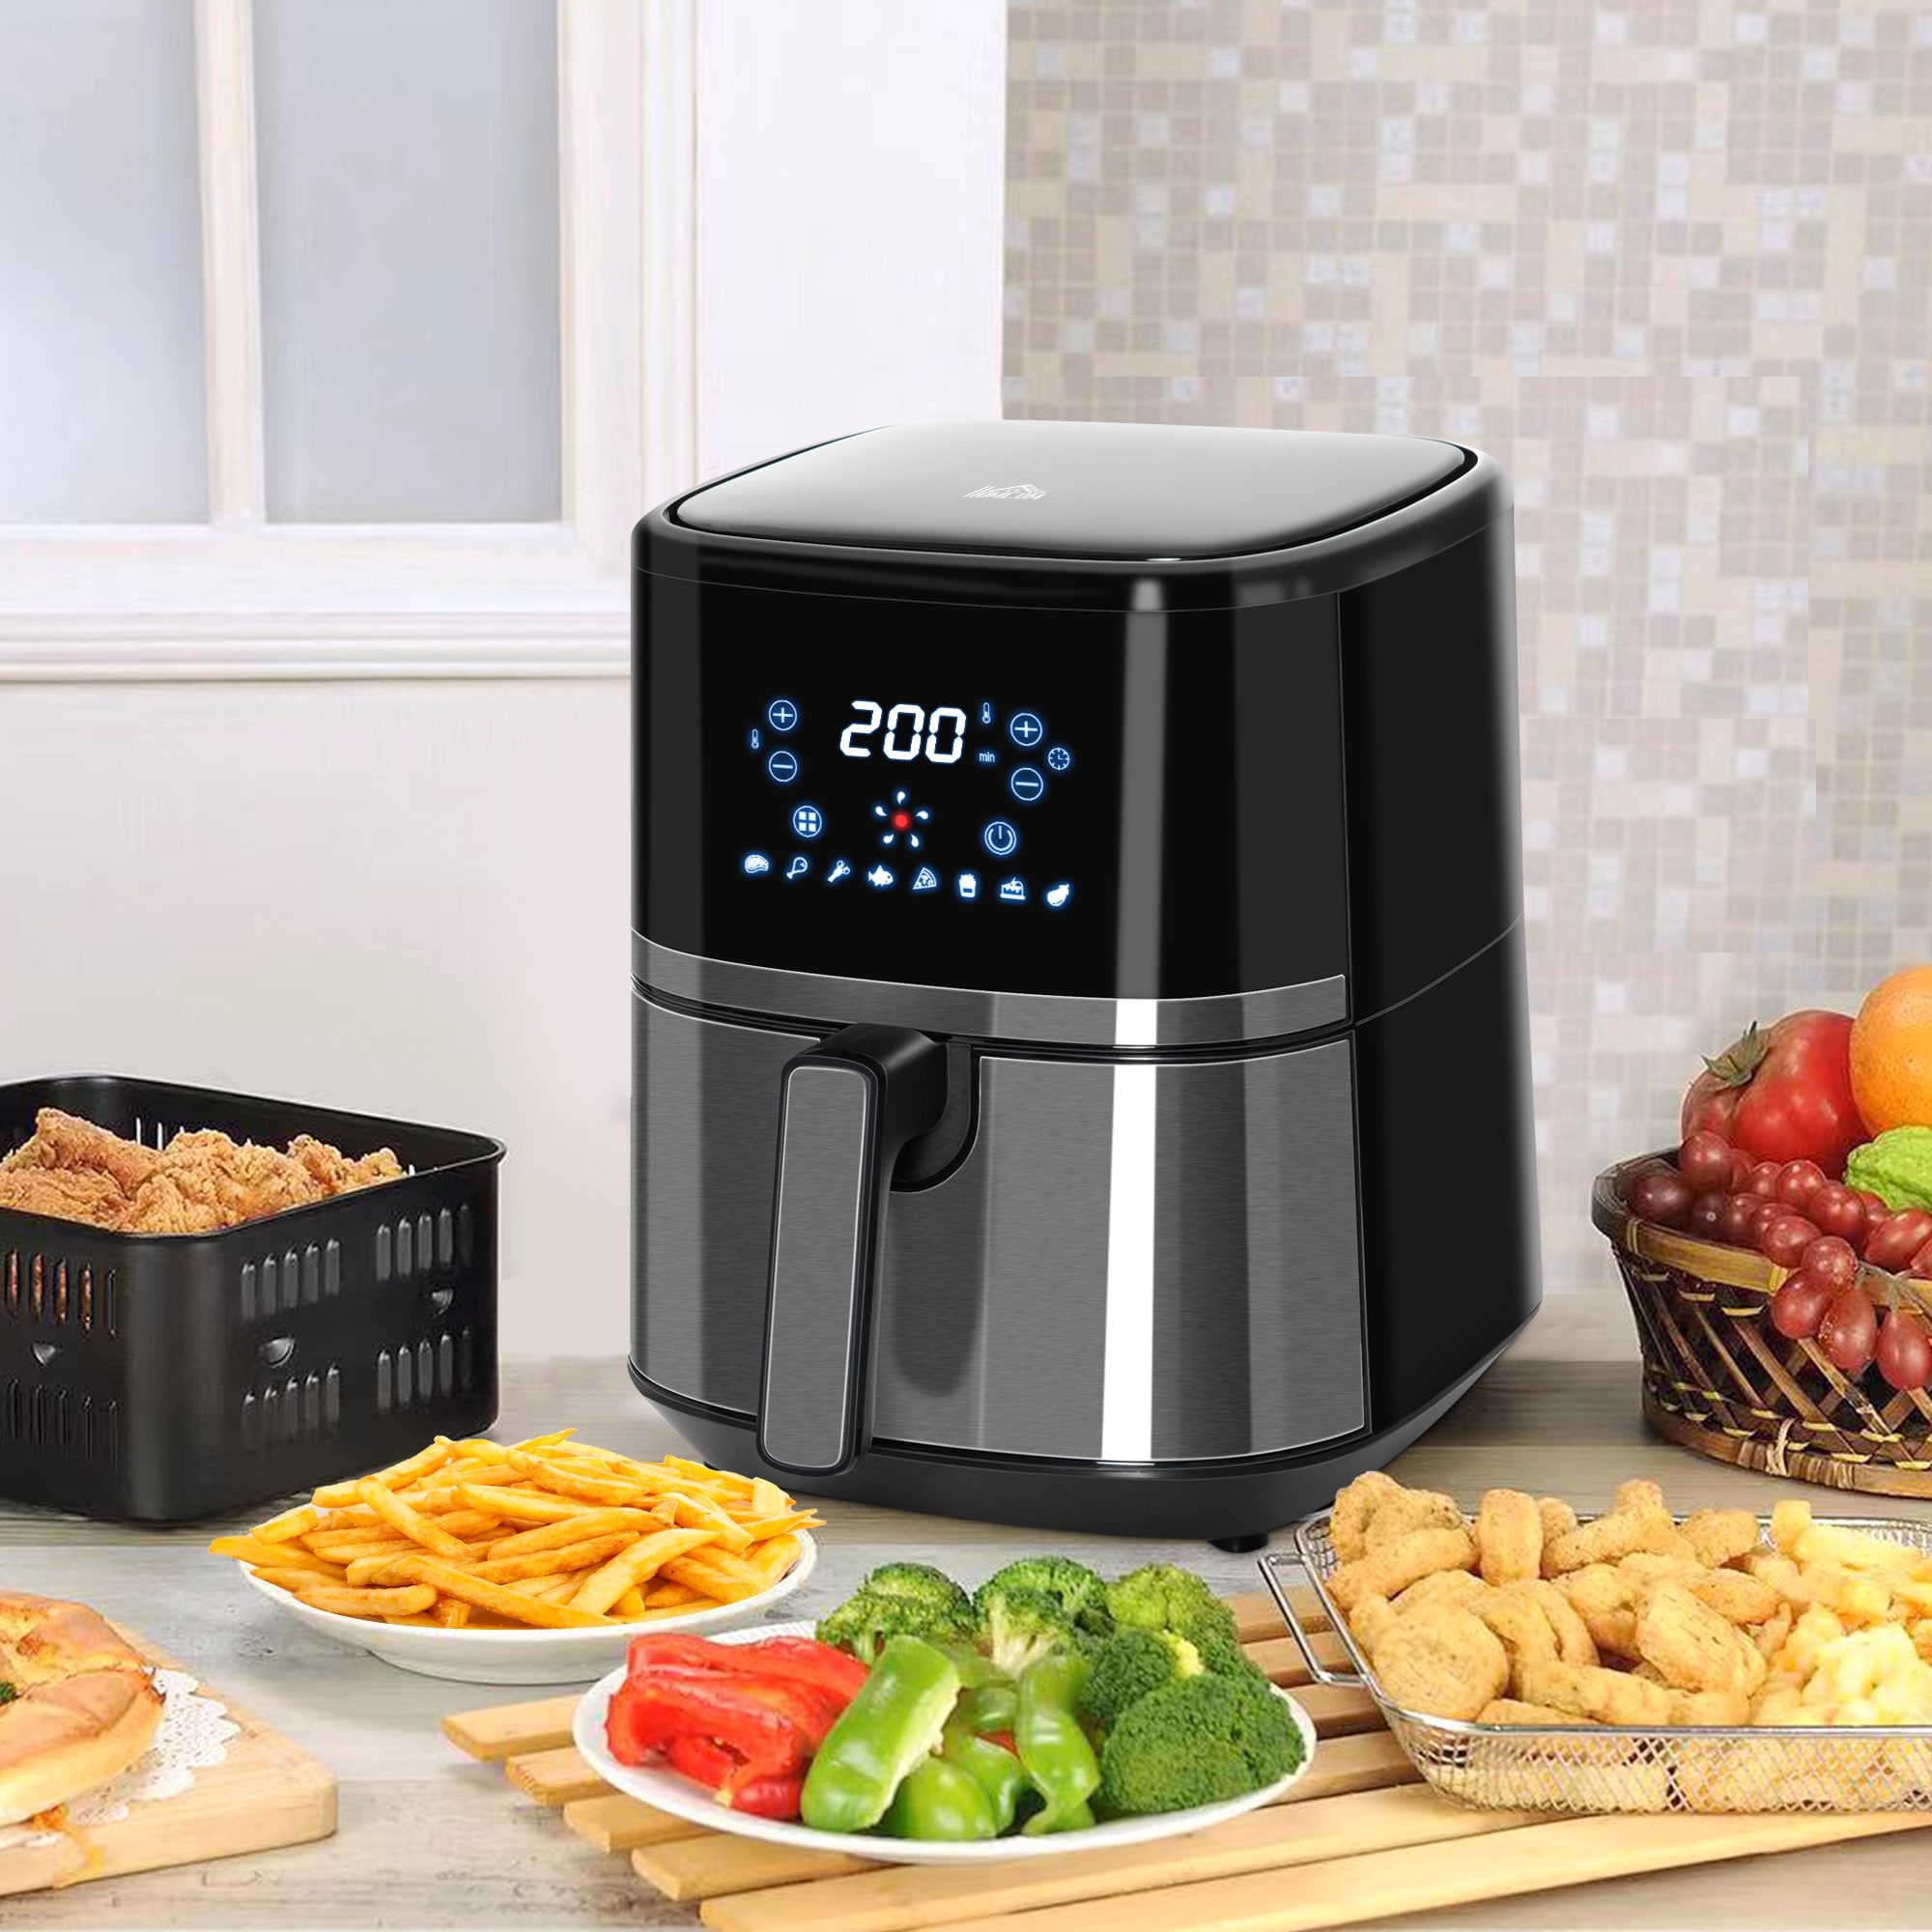 HOMCOM Small Air Fryer Oven Countertop Oven Cooking Gift - 13.5L x 10W x  12.5H - Bed Bath & Beyond - 35464056